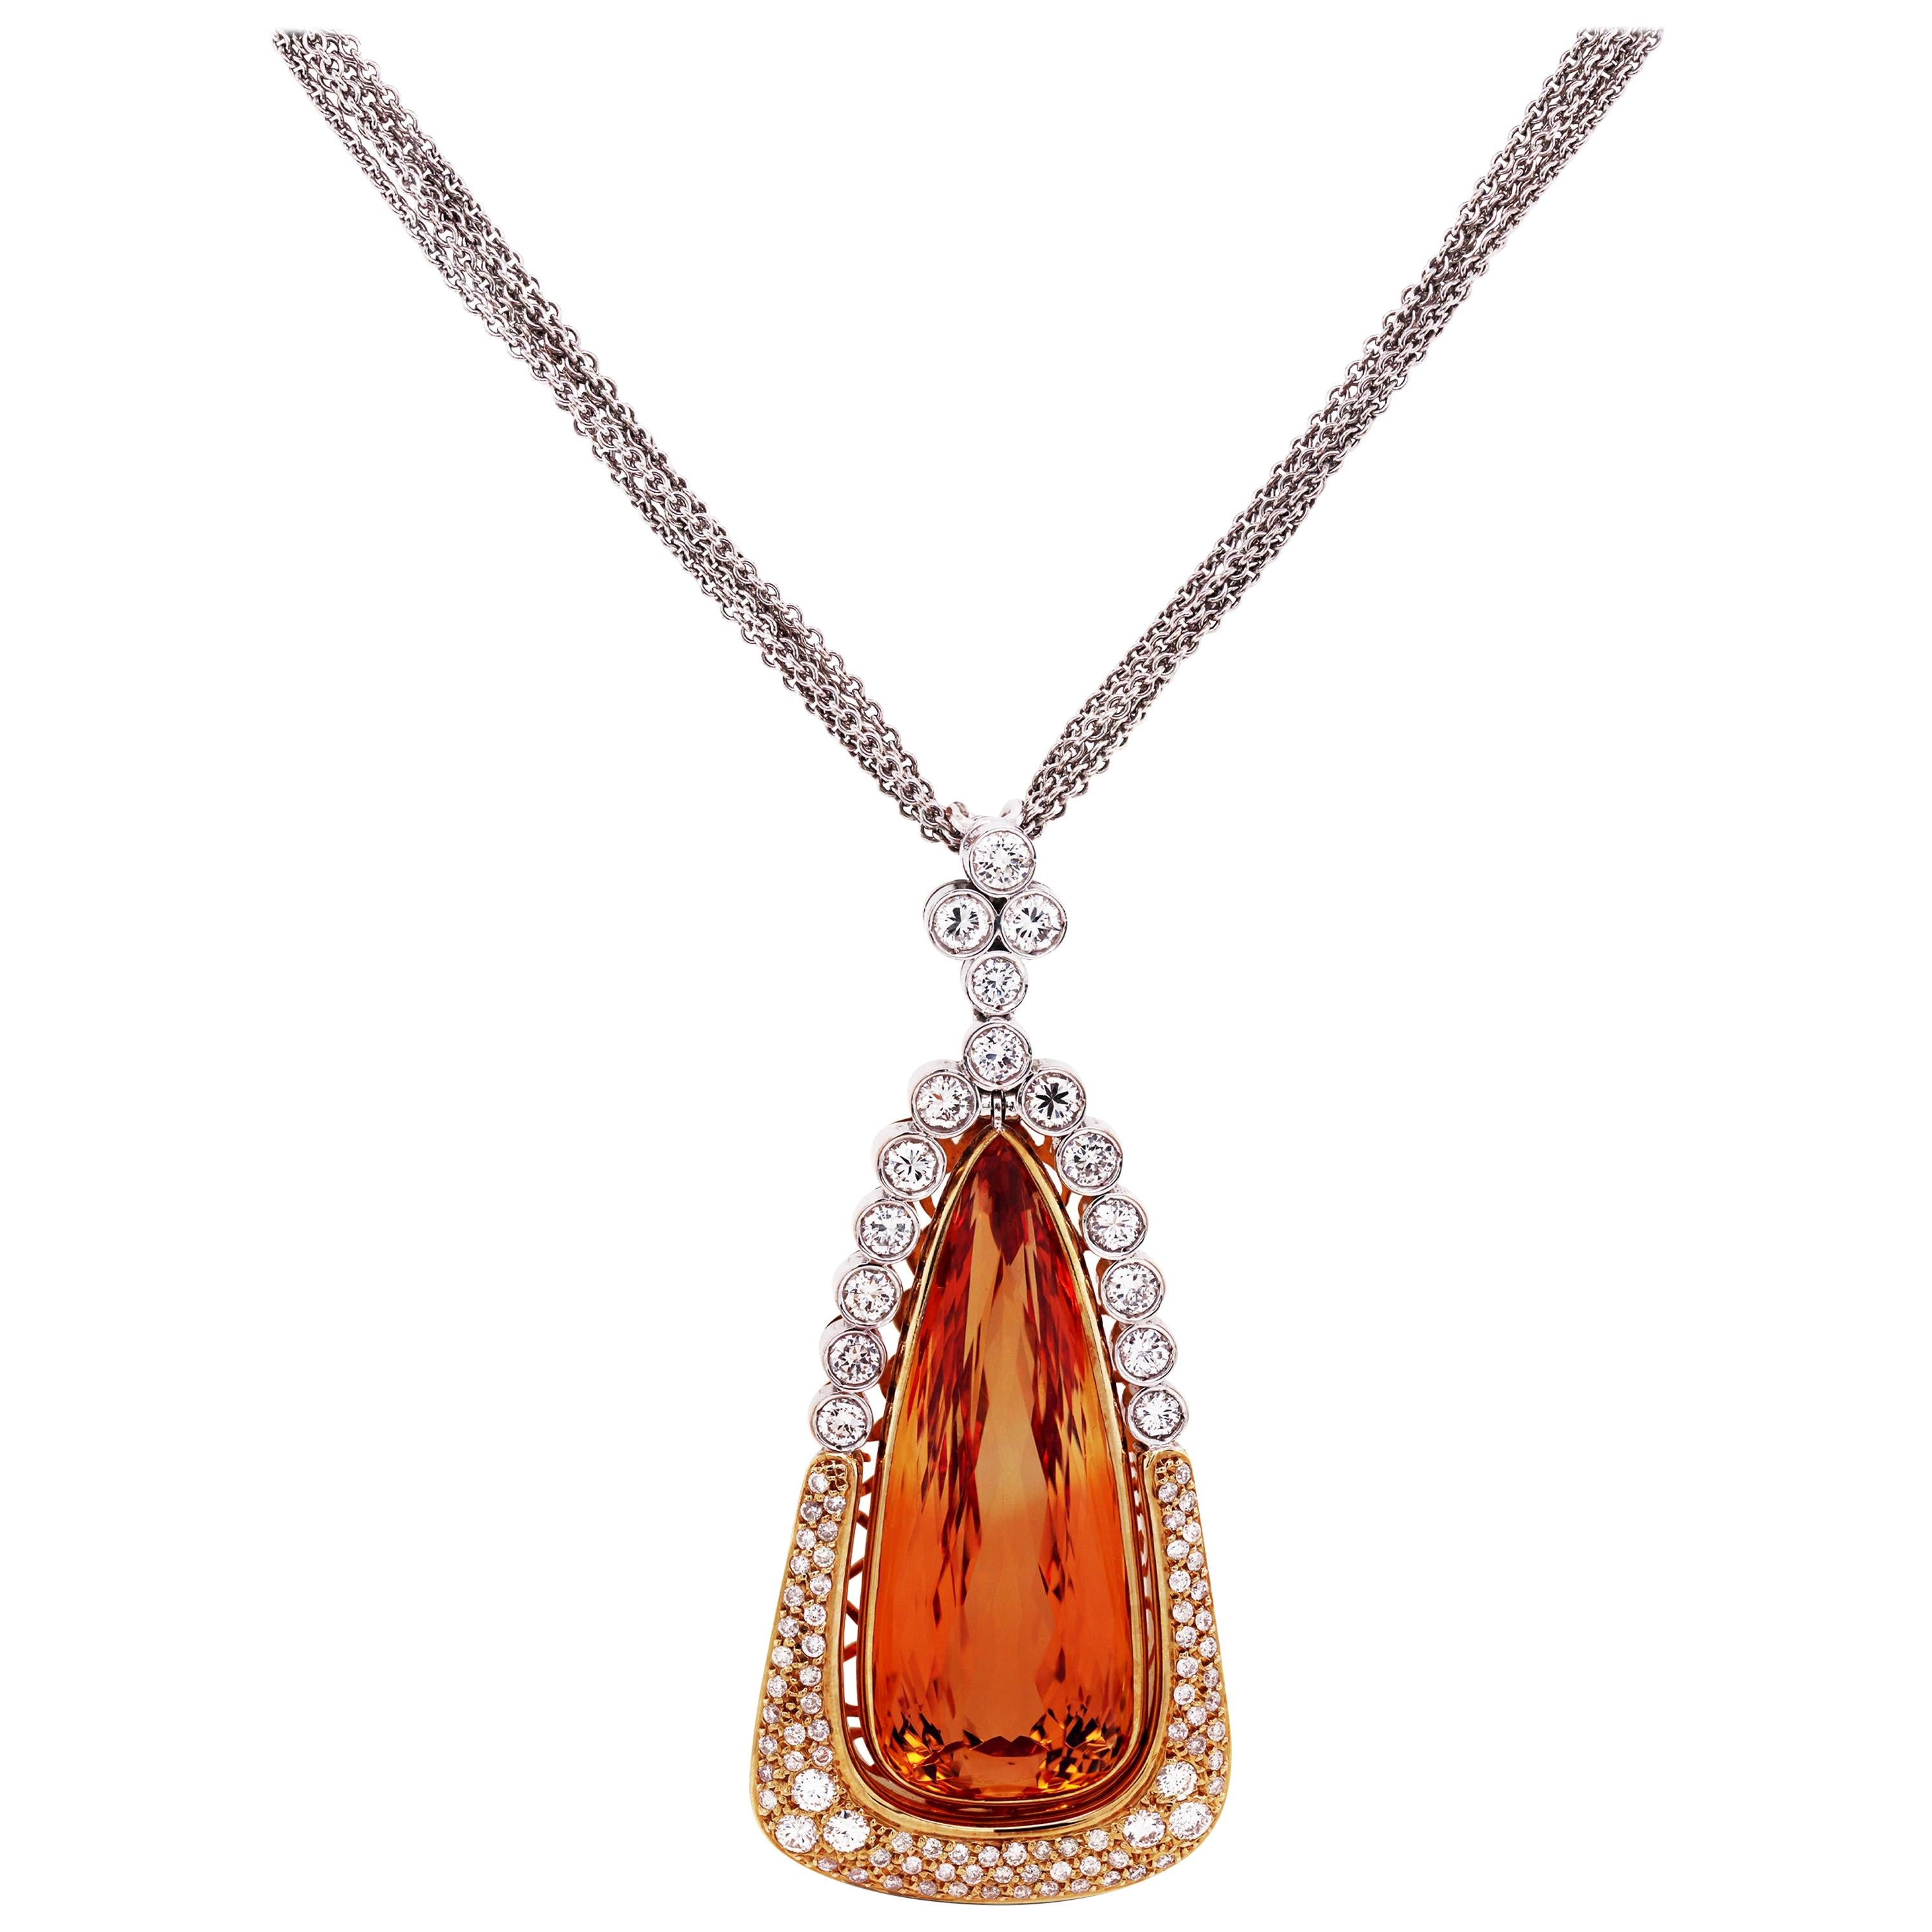 18 Karat Rose and White Gold Pendant with Diamonds an Pear Shape Imperial Topaz